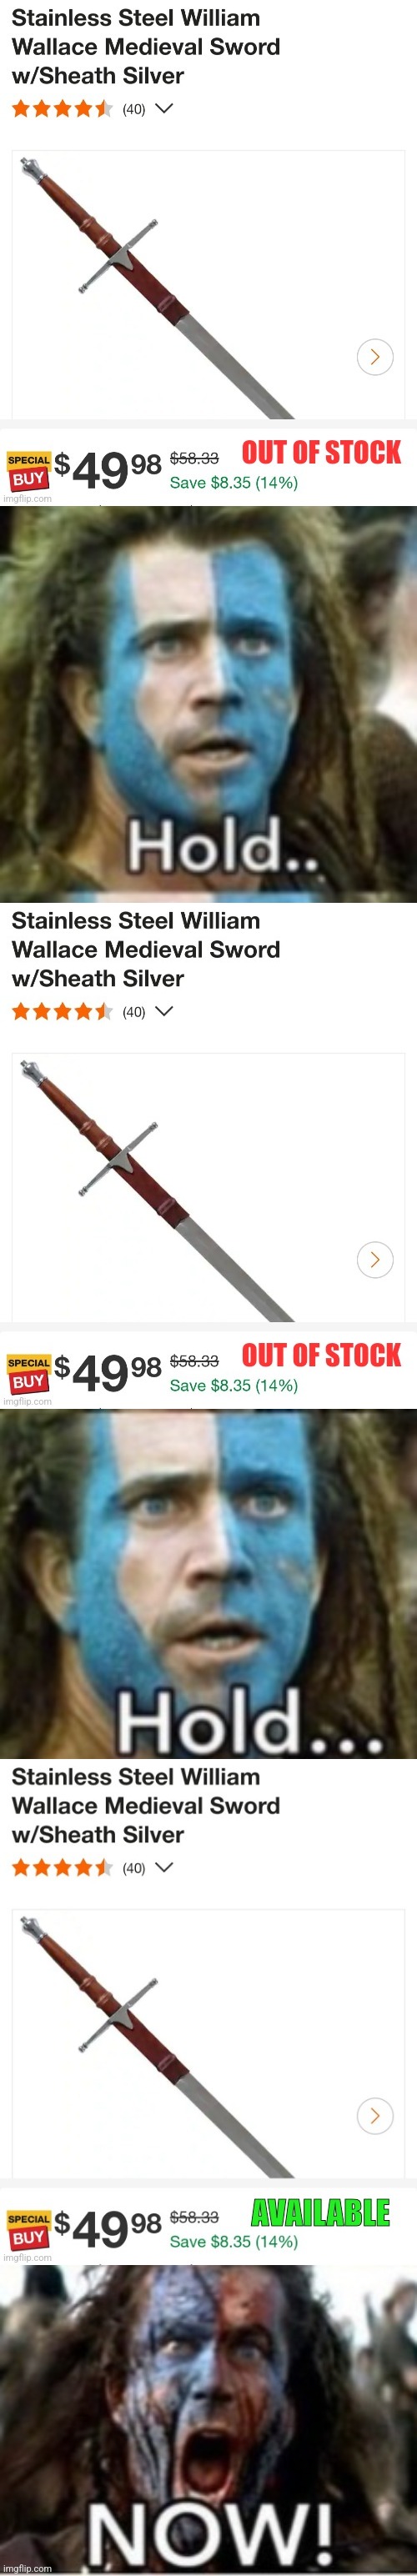 Home Depot does it again | image tagged in home depot,braveheart,sword | made w/ Imgflip meme maker